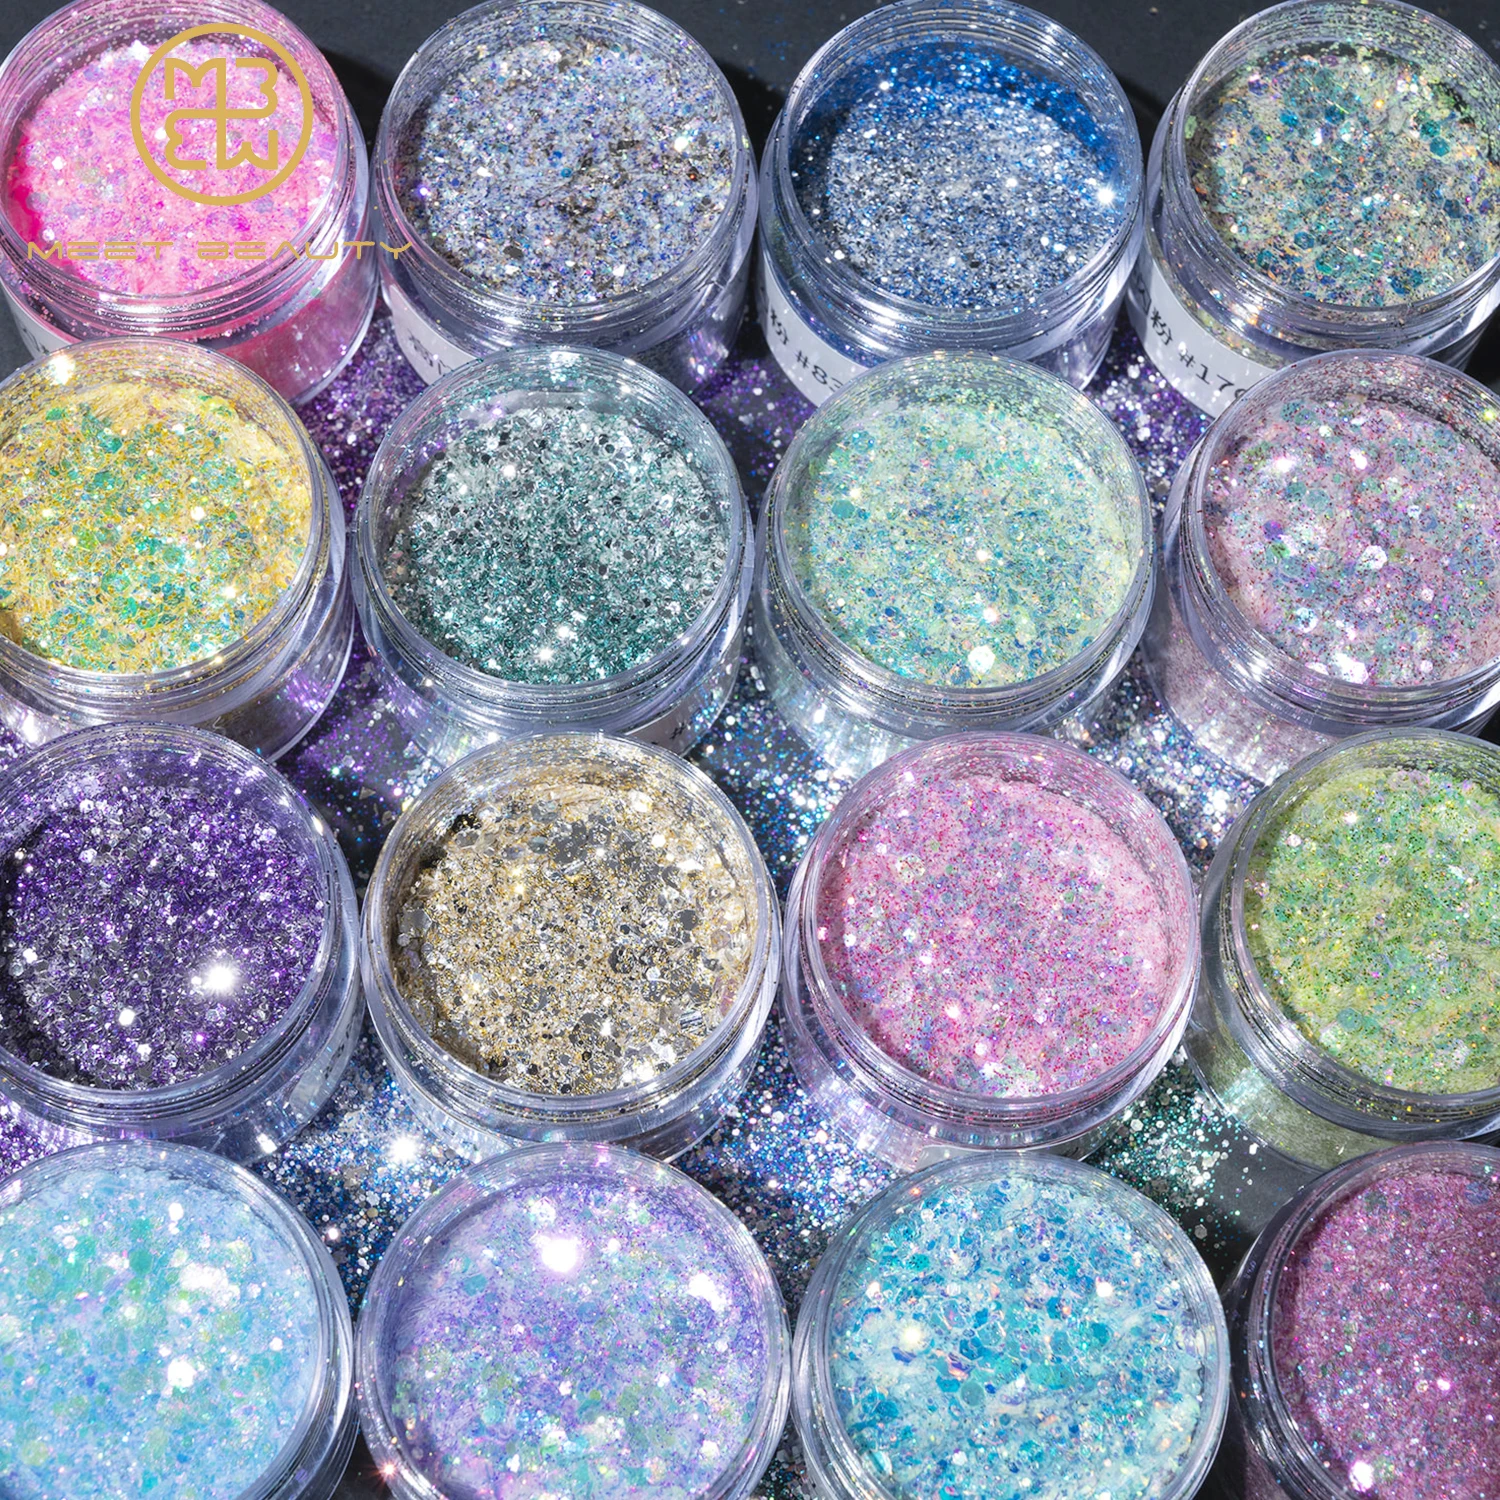 

Wholesale Chameleon Flakes Pigment Eyeshadow For Makeup Holograpphic Loose Glitter Powder For Cosmetic, More than 200 colors or customized or glitter mix